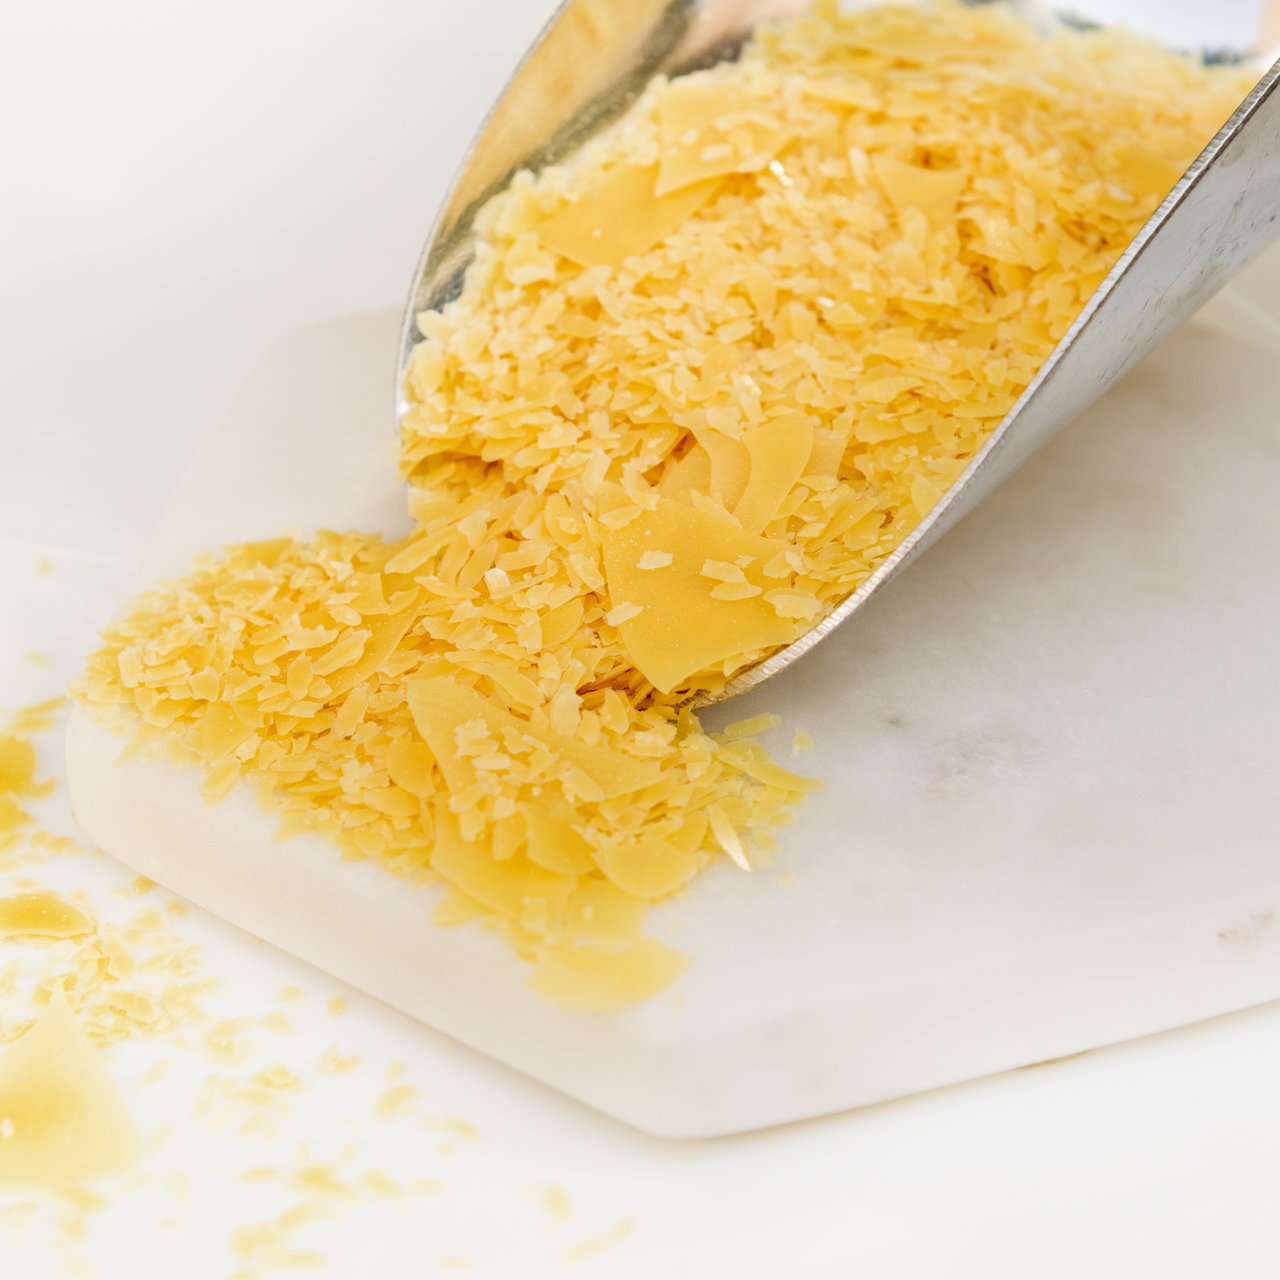 Stock Up With Wholesale Supplies Of emulsifying wax nf 